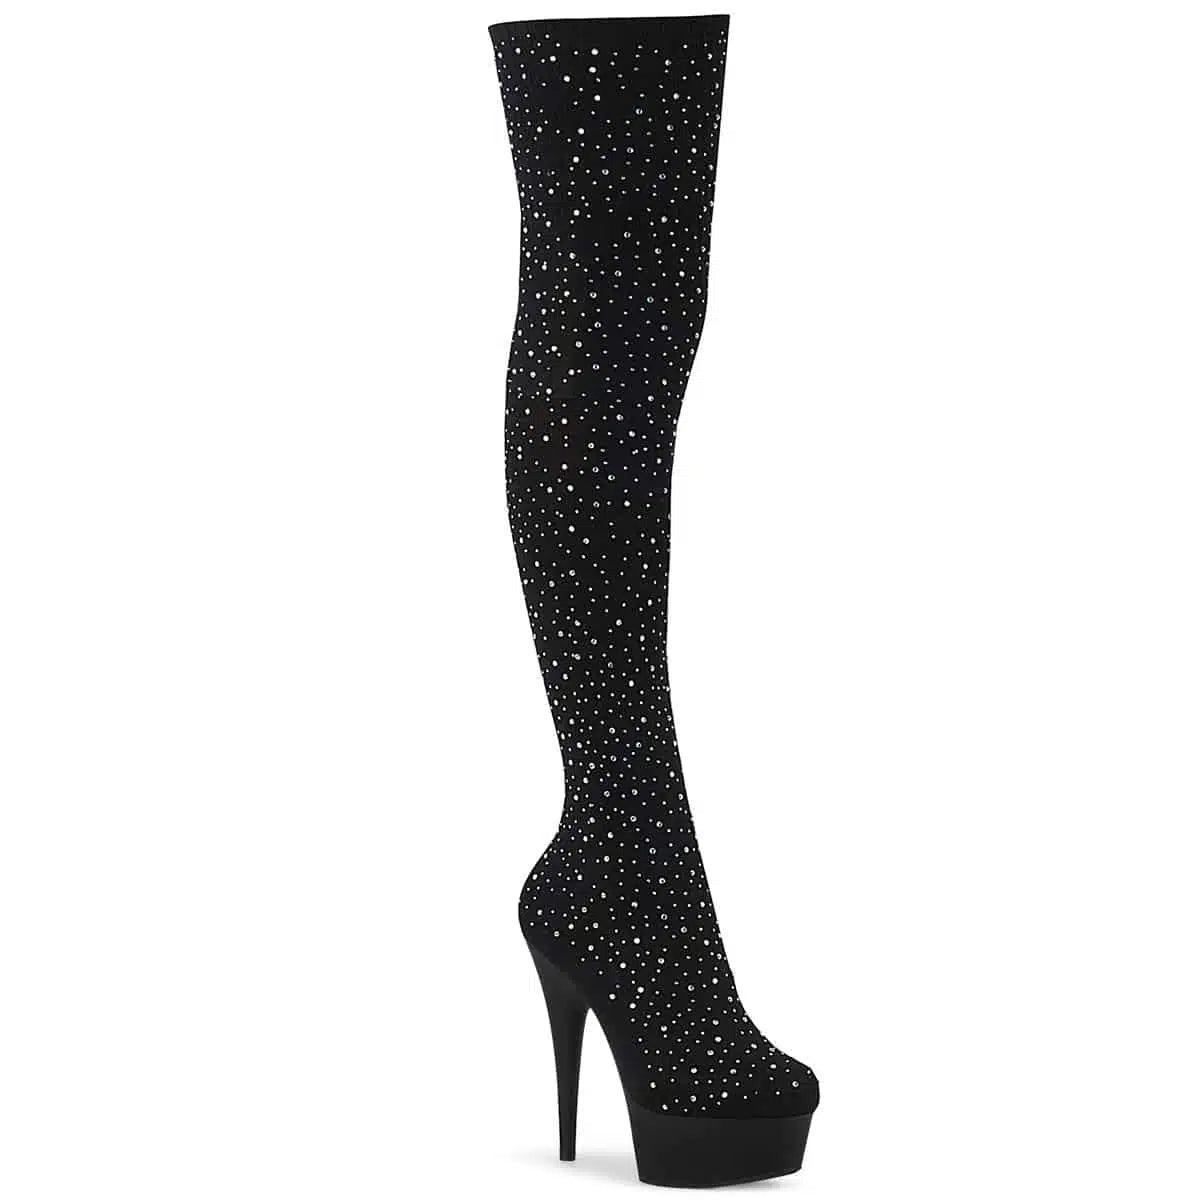 PLEASER DELIGHT 3002 BLACK STRETCH FABRIC RHINESTONES OVER KNEE THIGH HIGH BOOTS SIZE 9 USA SALE